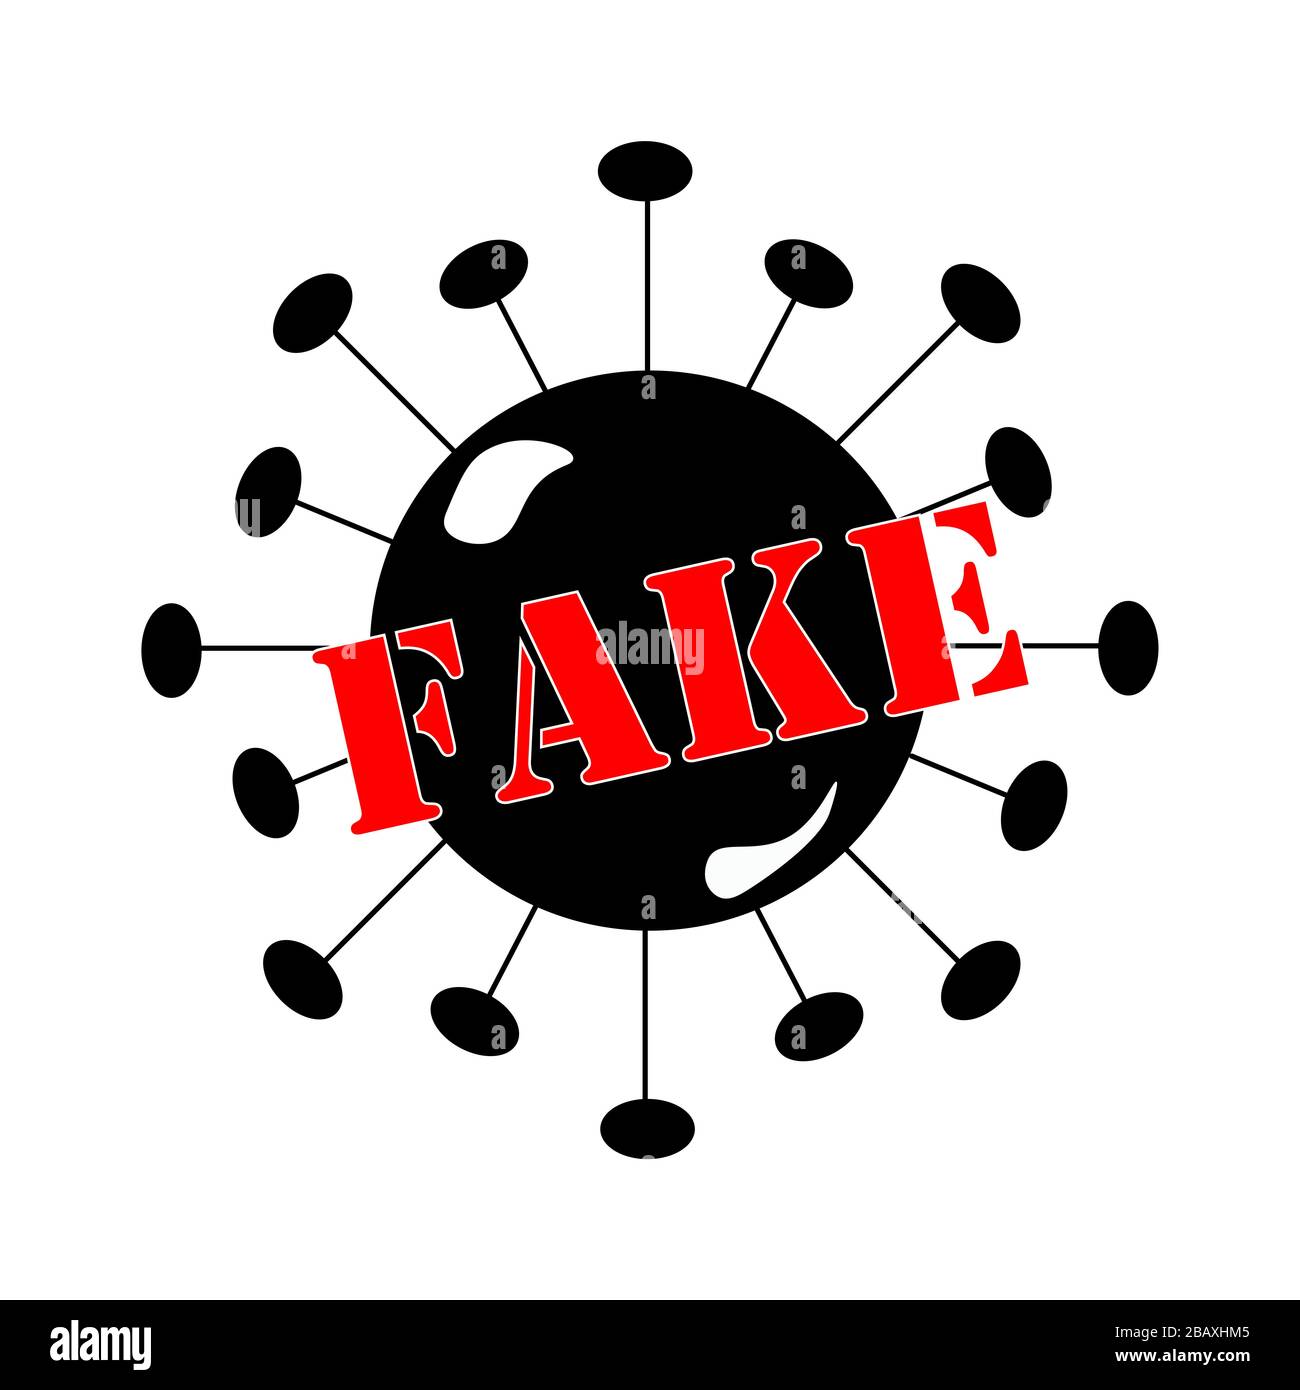 Covid19 coronavirus shape and red word FAKE on top of it. Concept for fake news, reports, statistics, fake information during global pandemic and quar Stock Photo